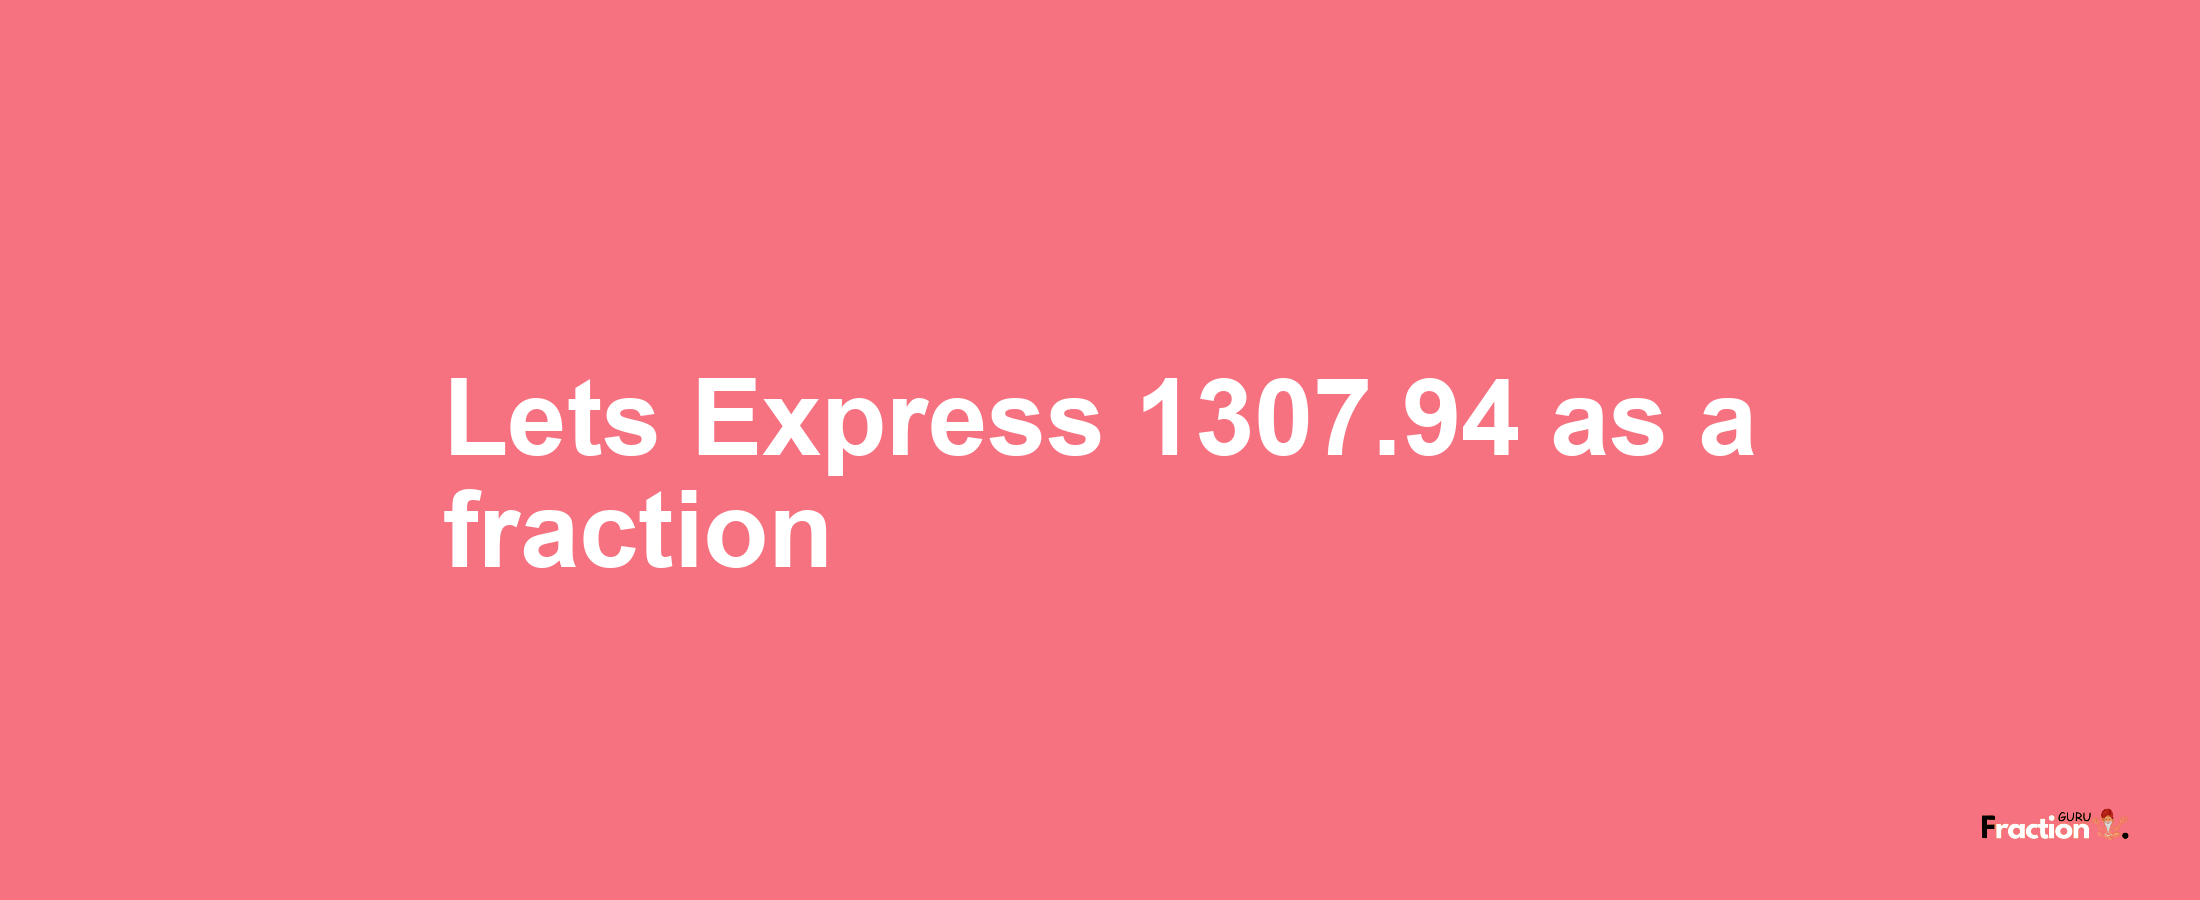 Lets Express 1307.94 as afraction